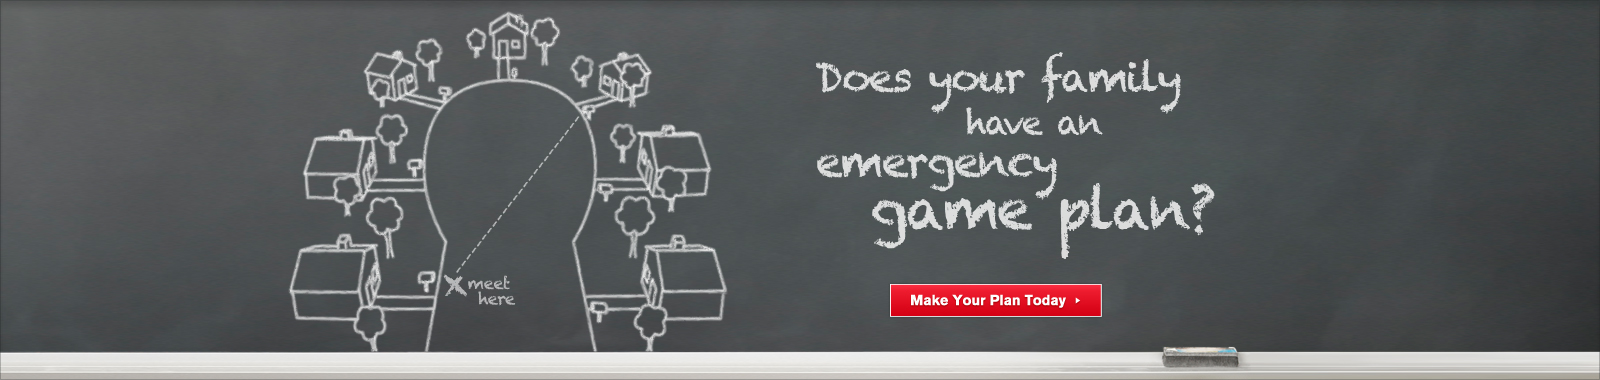 Does your family have an emergency plan?